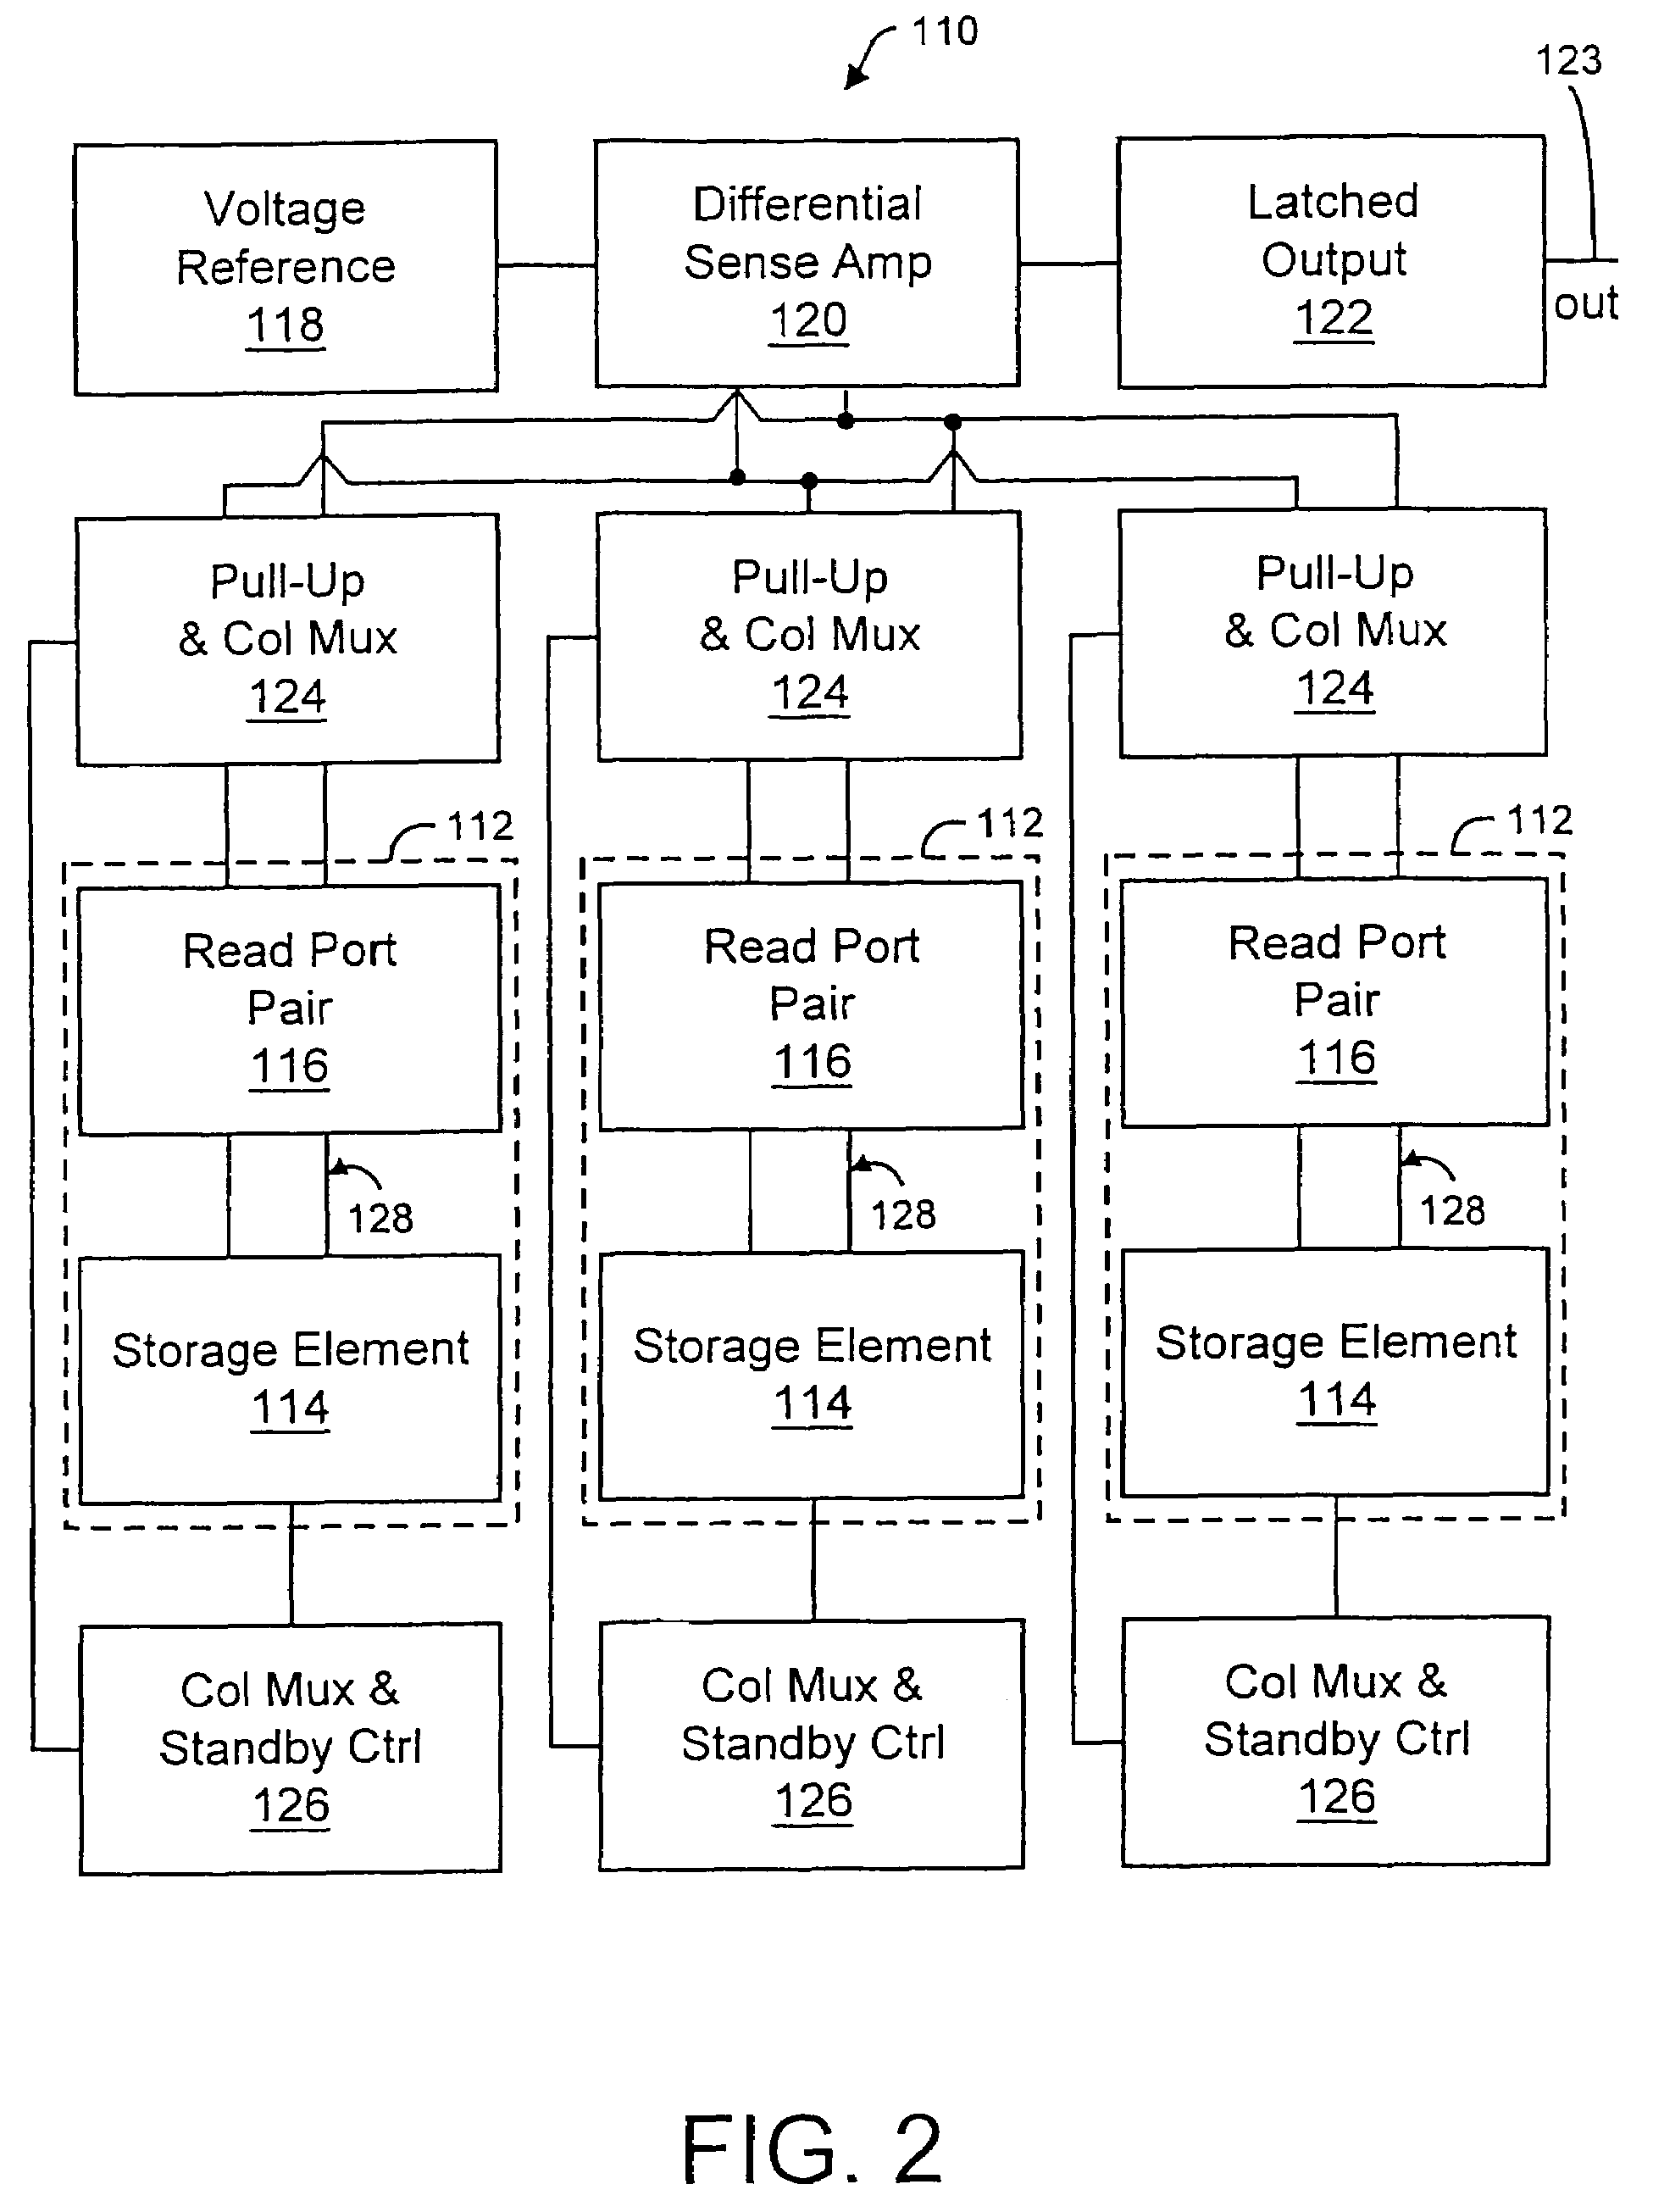 Very small swing high performance asynchronous CMOS static memory (multi-port register file) with power reducing column multiplexing scheme